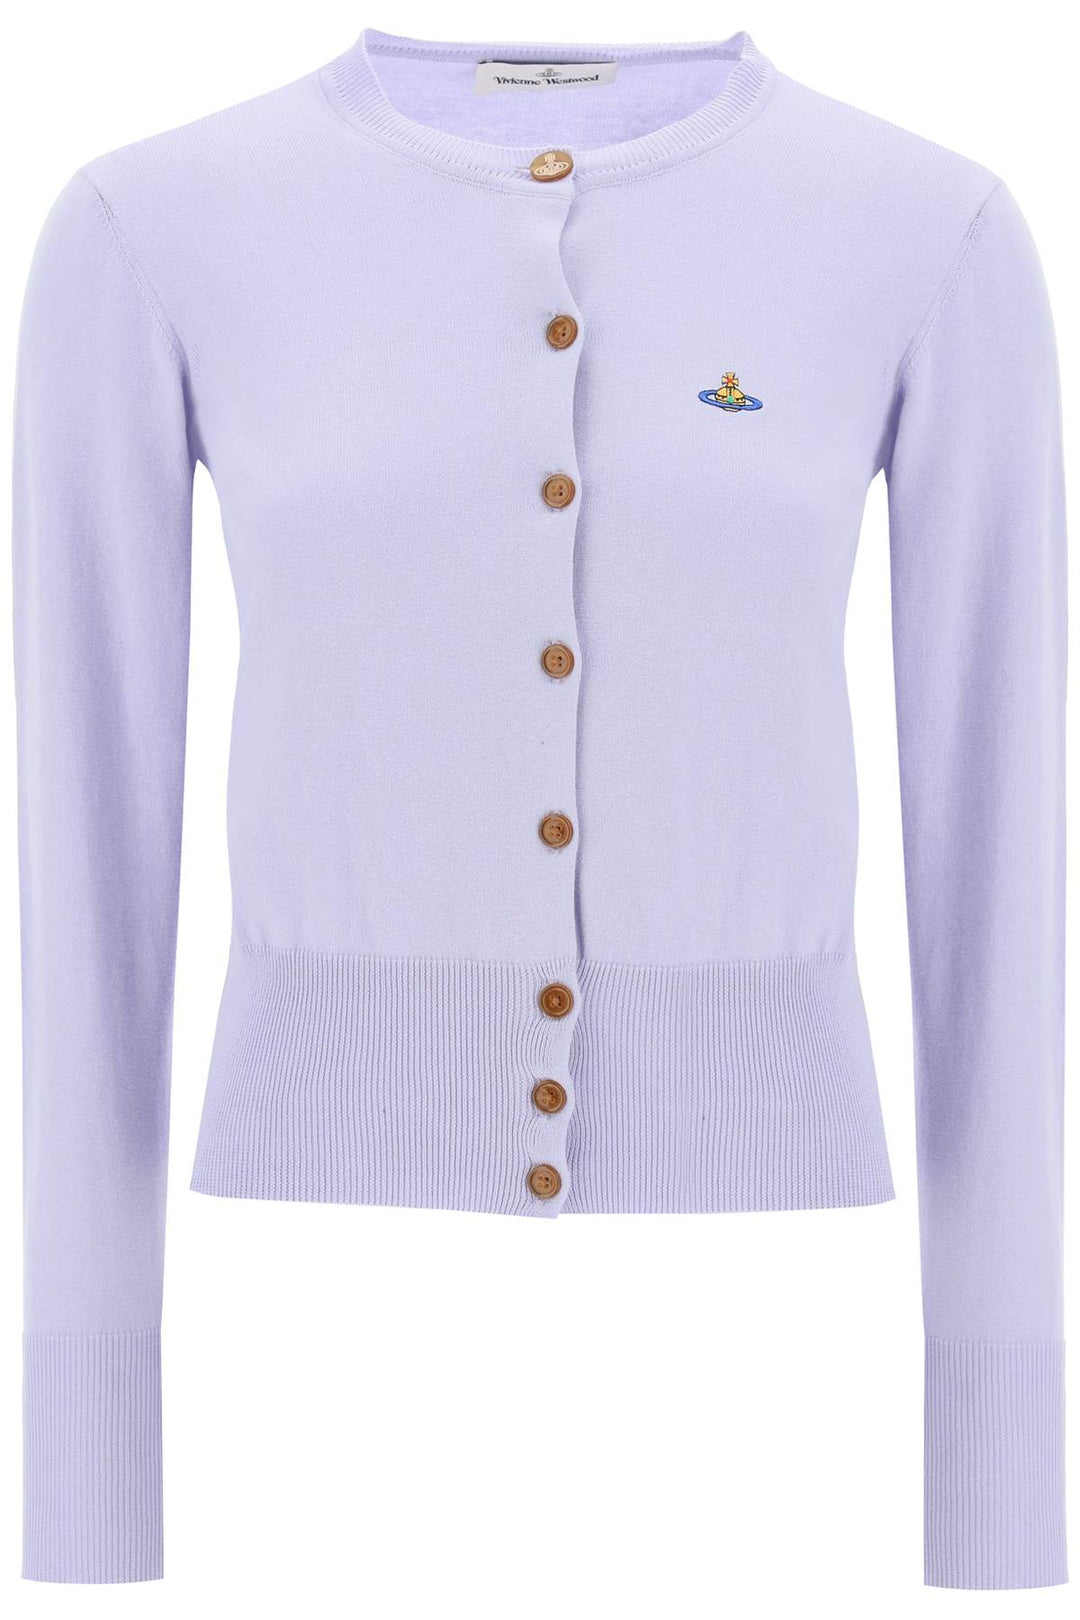 Vivienne Westwood Bea Cardigan With Logo Embroidery   Viola